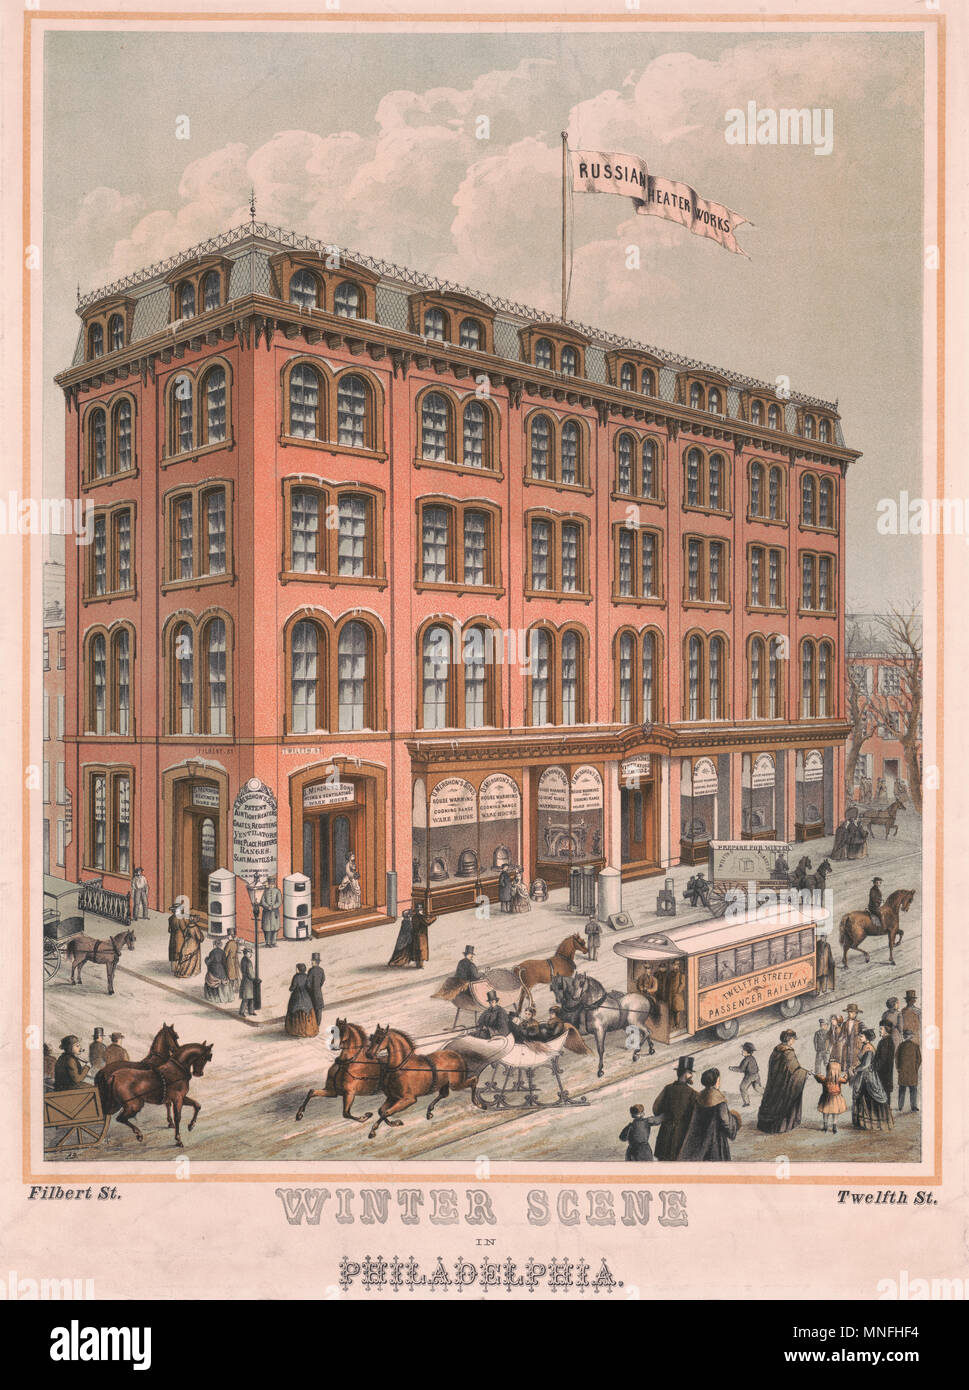 Winter scene in Philadelphia - Print shows a street scene in winter in front of the Russian Heater Works at the intersection of Filbert and Twelfth streets in Philadelphia; includes many pedestrians on the street, the Twelfth Street Passenger Railway, and horse-drawn sleighs, circa 1880 Stock Photo